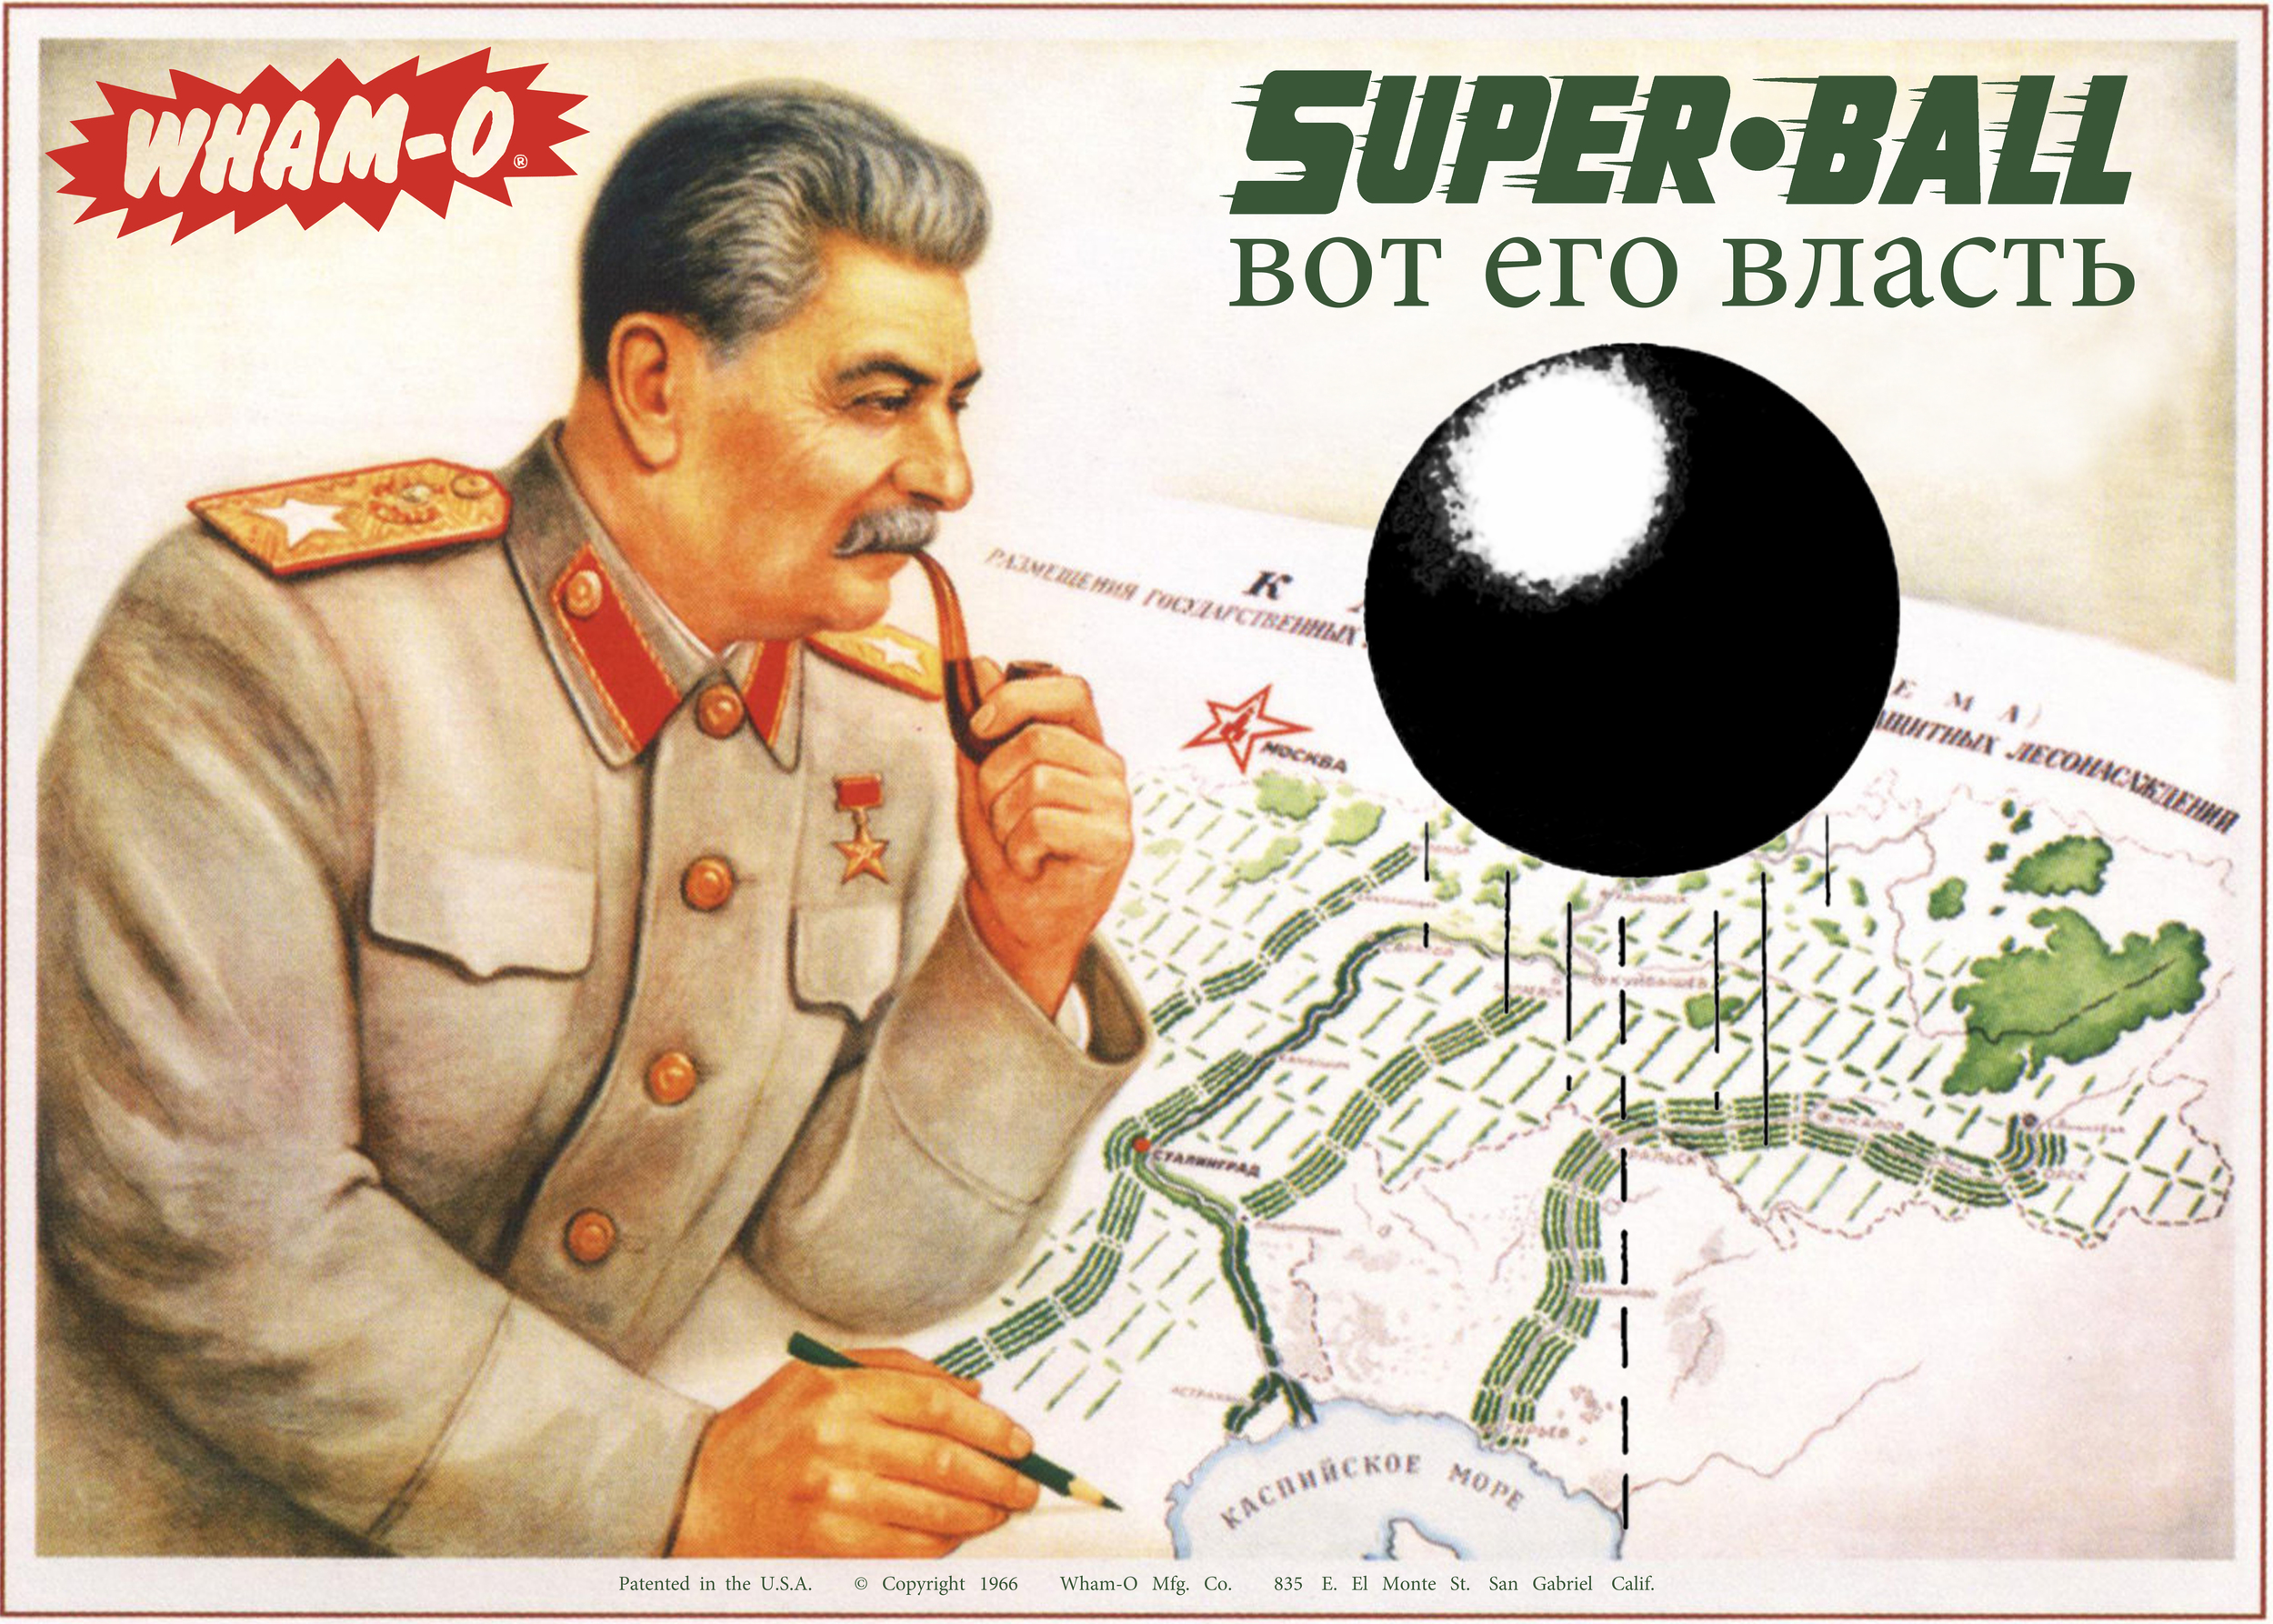  “Untitled (Stalin v. Super-Ball)” Poster  2013  Digital and hand-screened print, Ed. of 5 + 1AP  24"x 31 7/8"   Editions available  